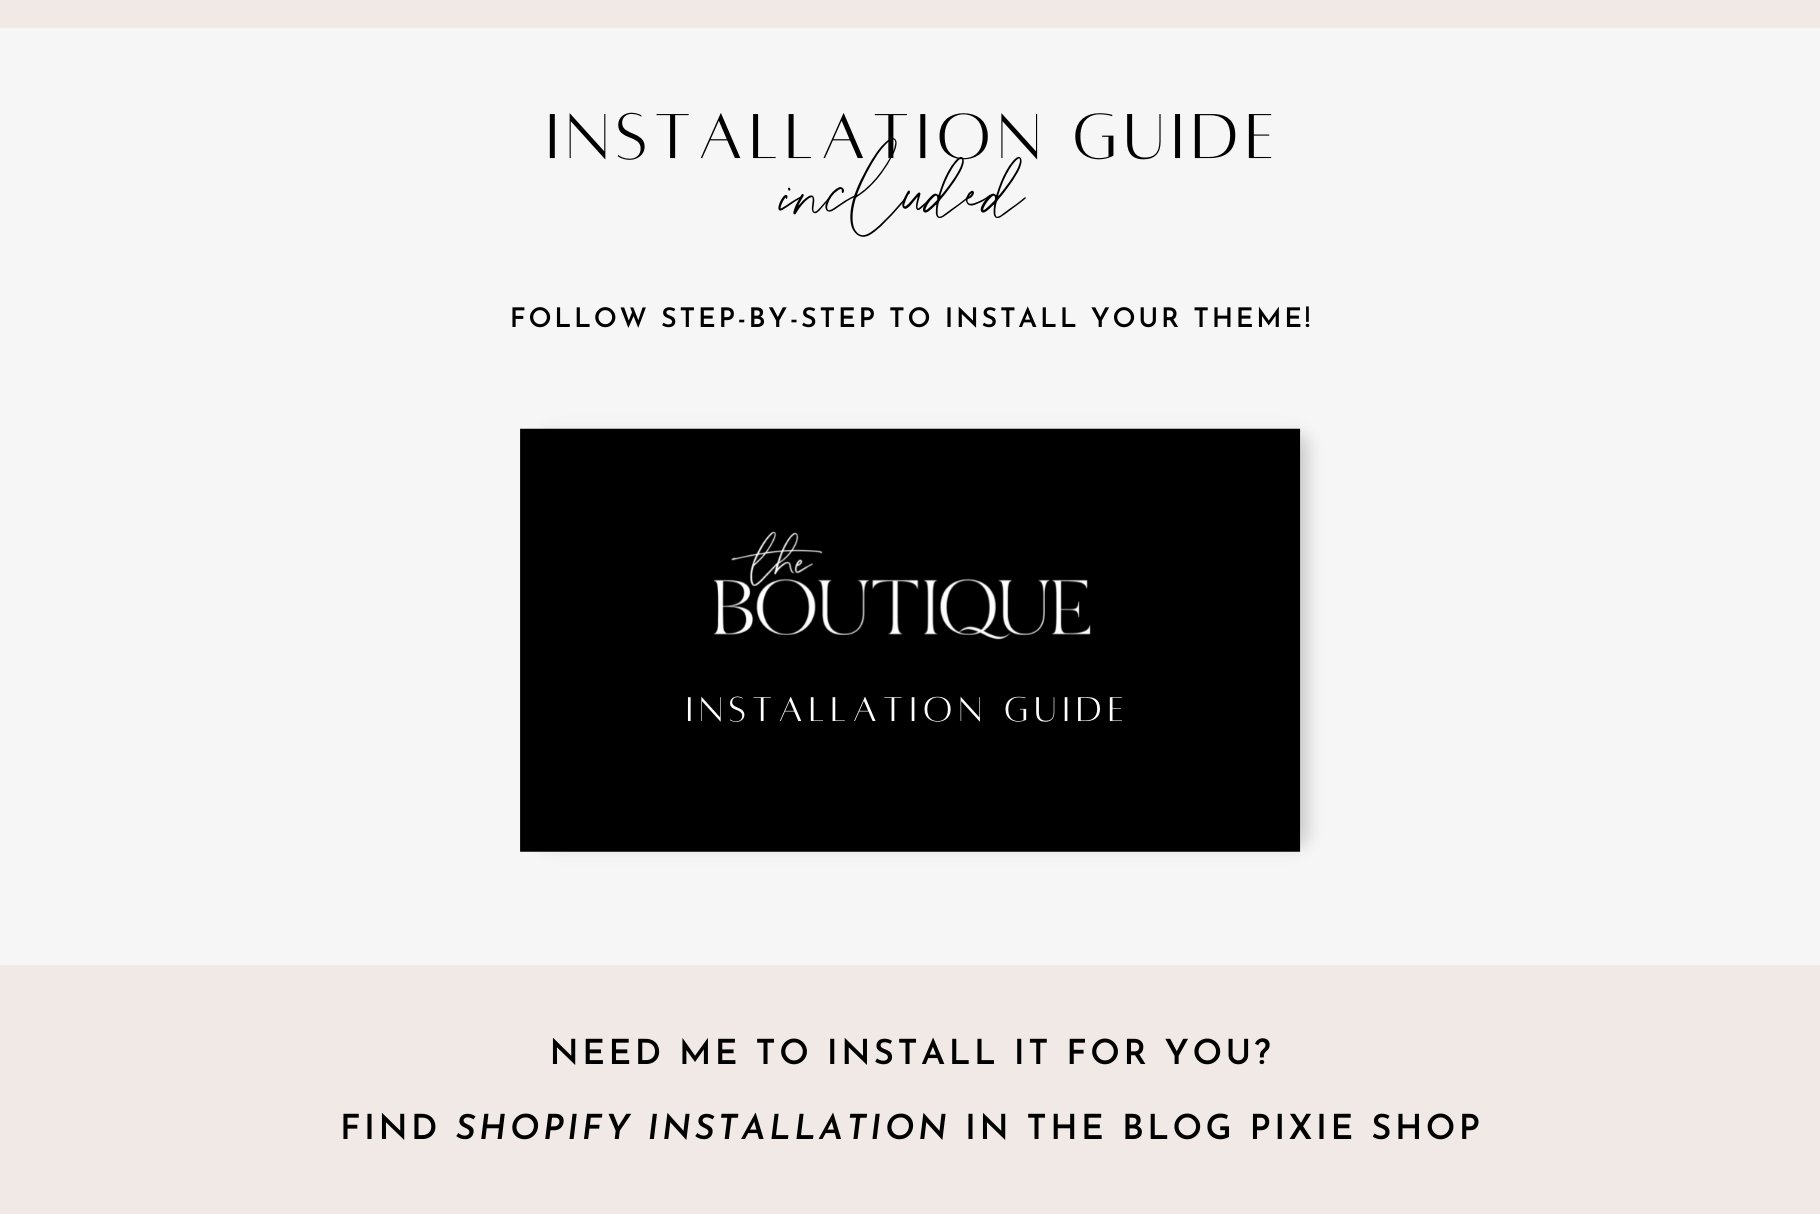 Installation guide included for Shopify theme bundle.